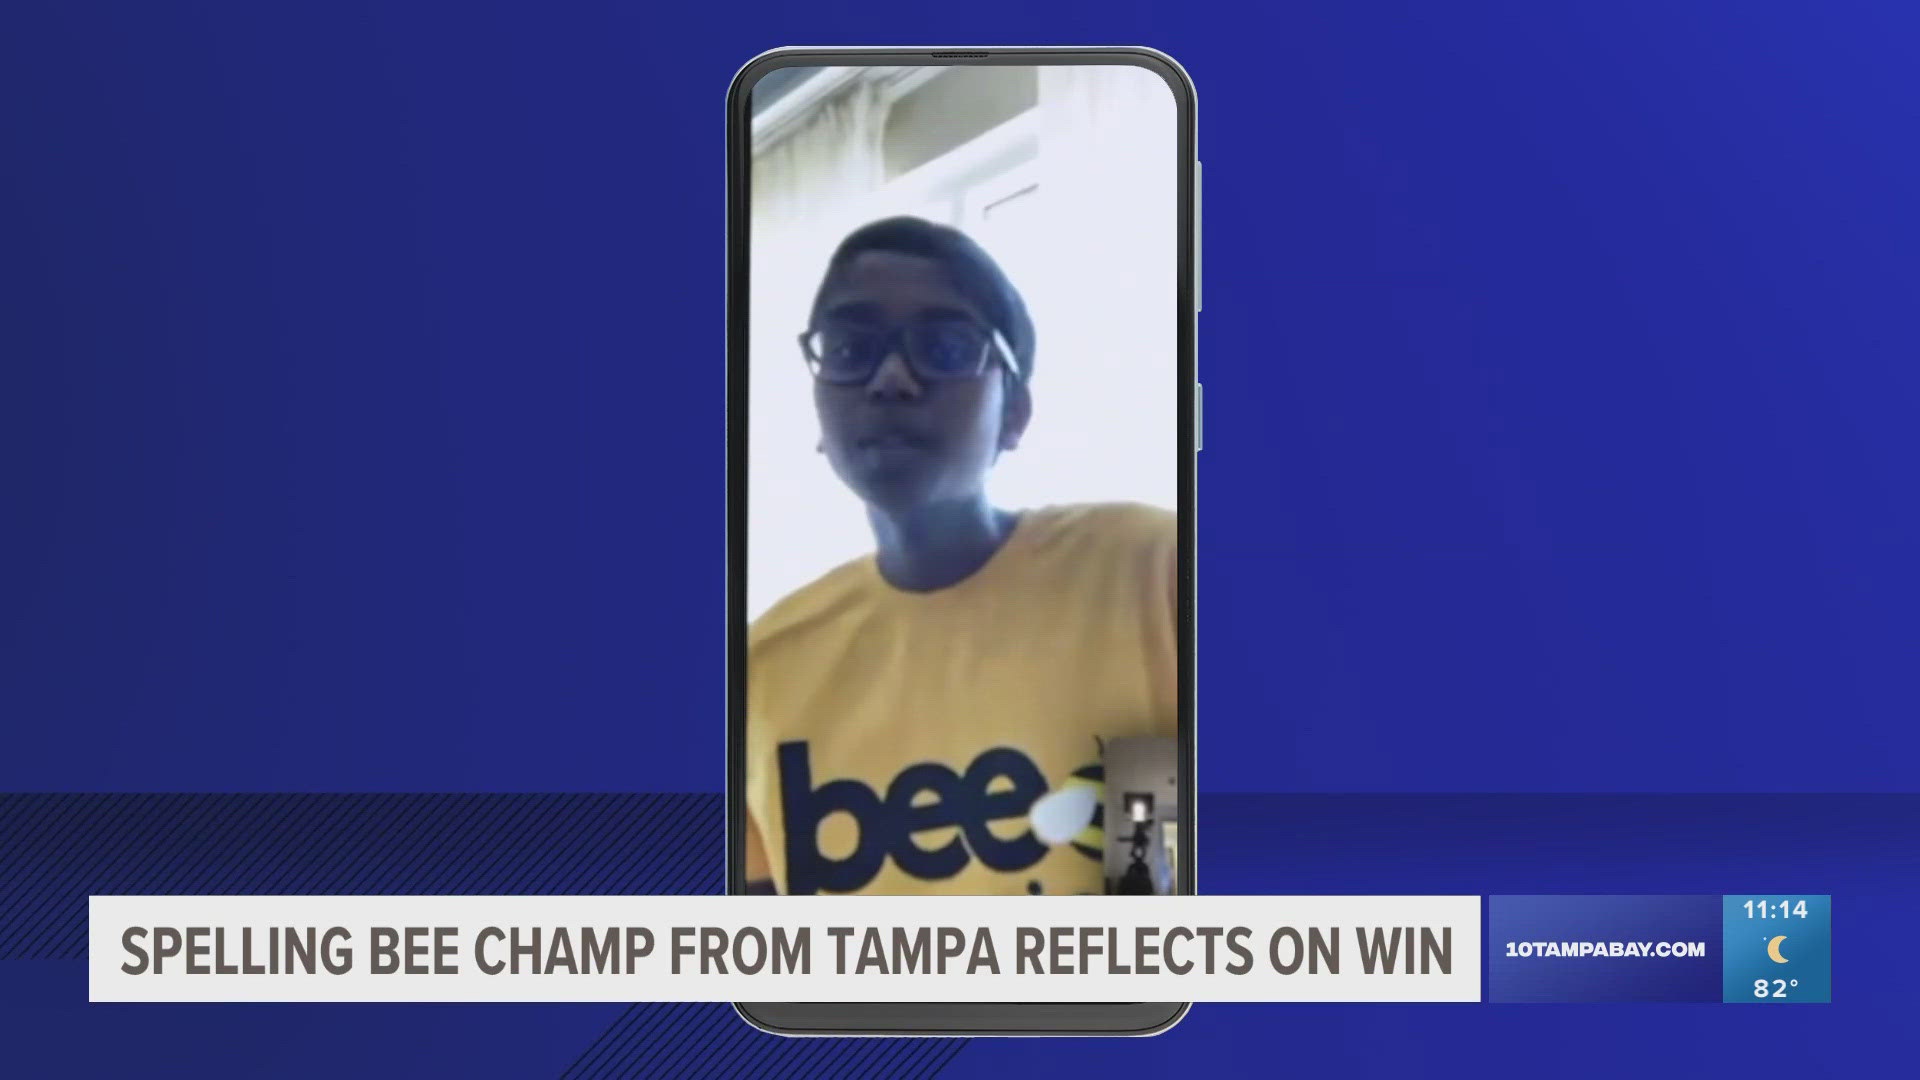 Bruhat Soma, 12, is a rising 8th grader at Turner/Bartels K-8 school in New Tampa. He's the second straight winner from the Tampa Bay area.